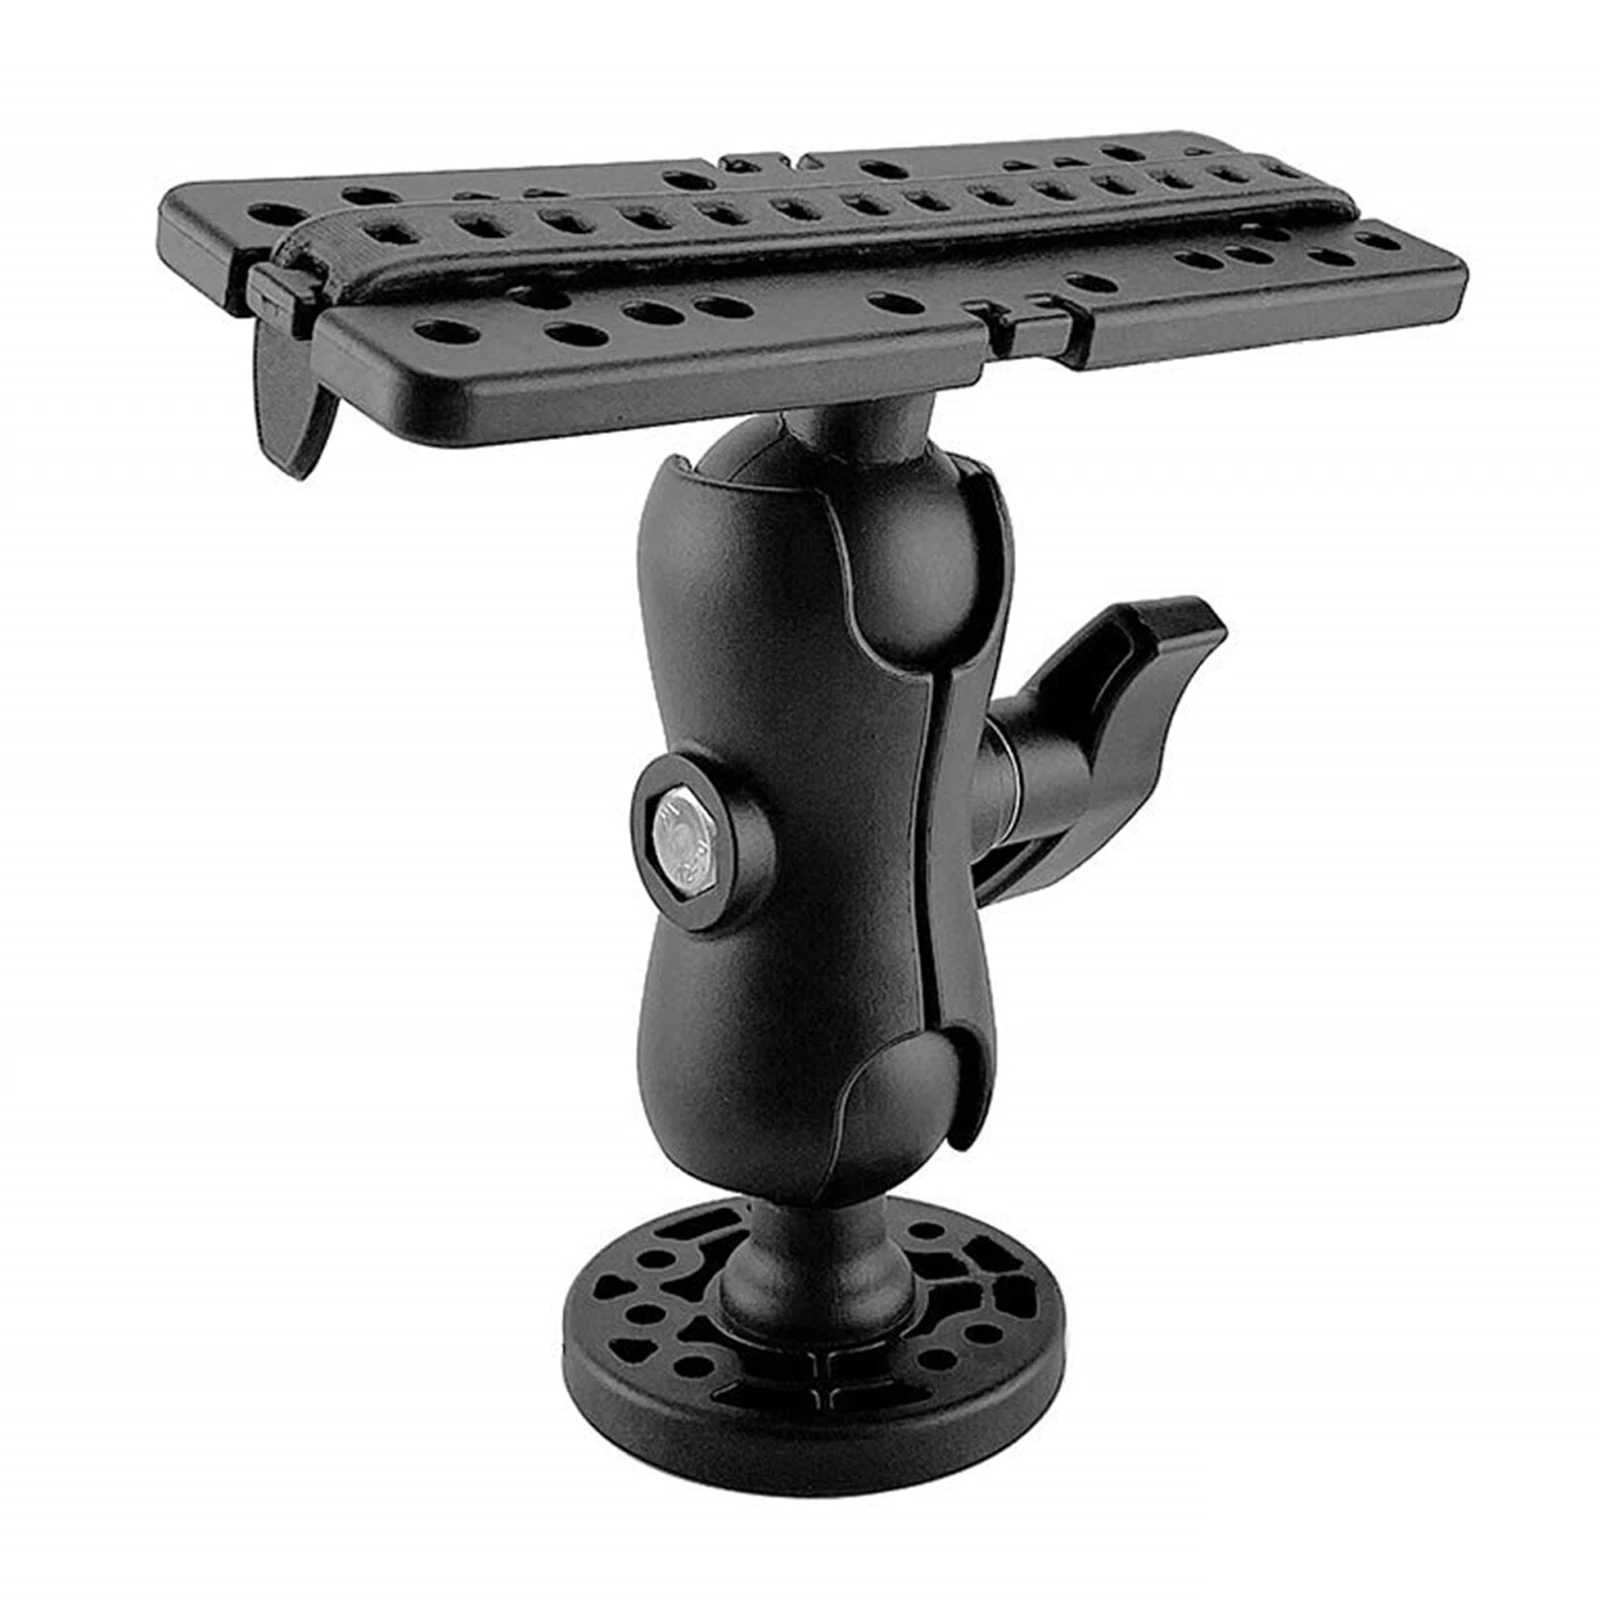 

Ball Fish Finder Mount 360 Degree Swivel Multi-Holes Design Stable Electronic Fish Finder Mount Universal Mounting Plate